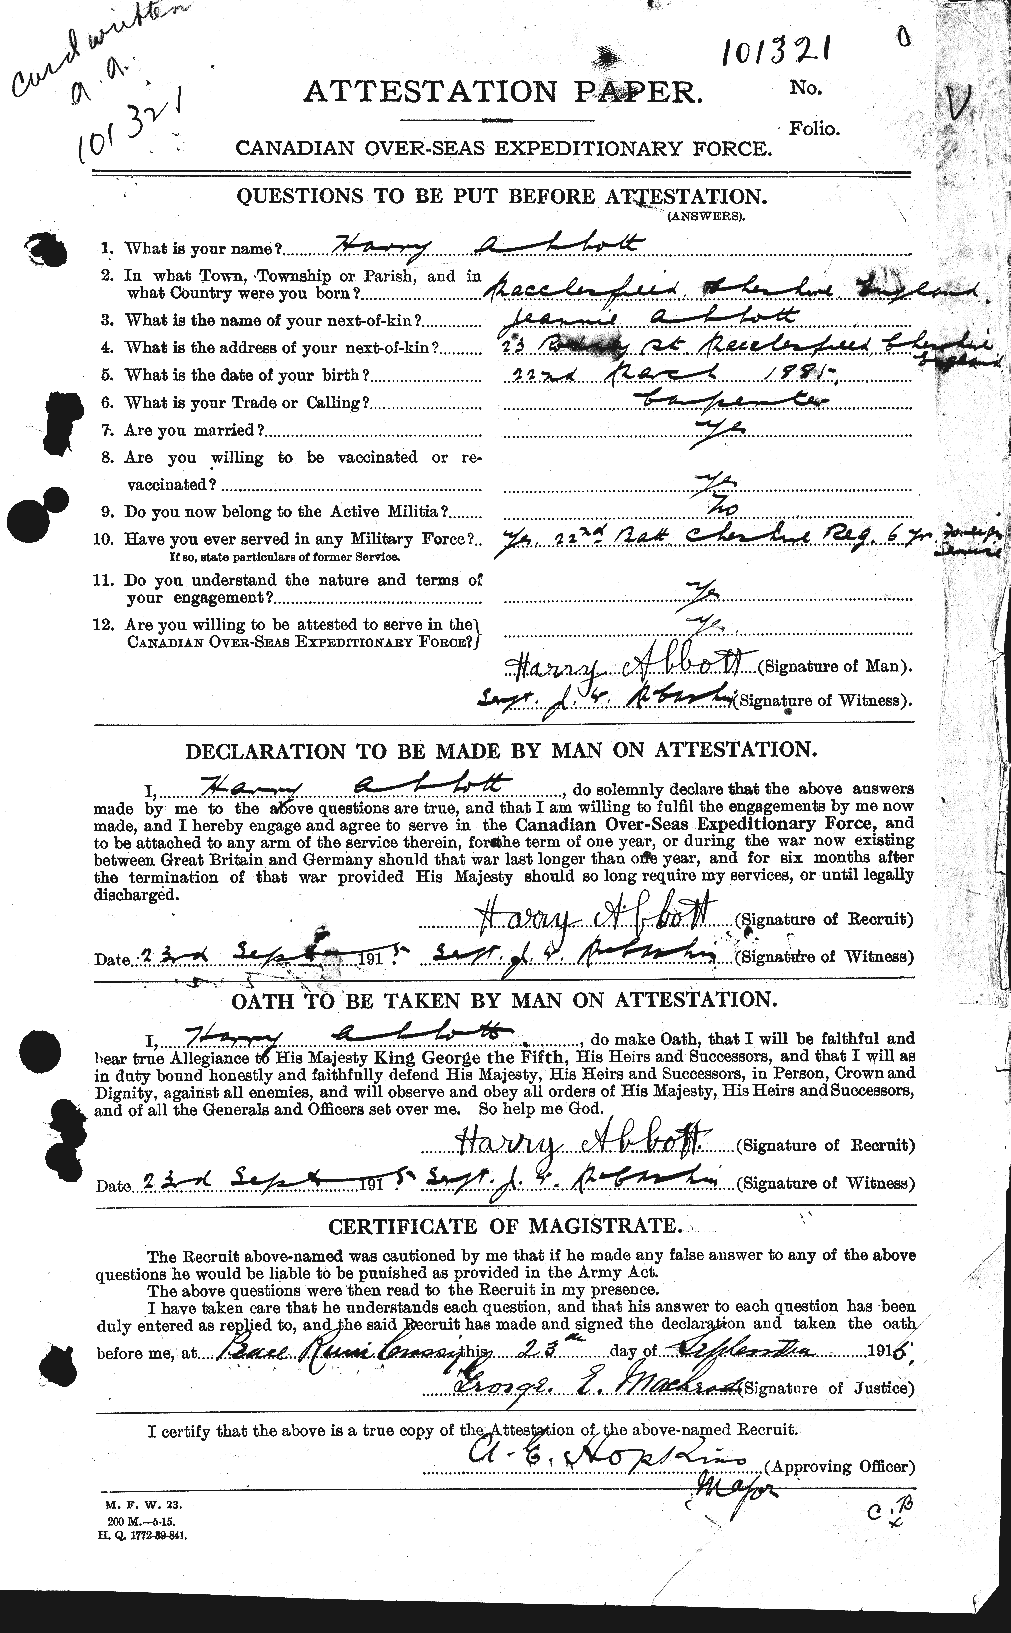 Personnel Records of the First World War - CEF 200959a